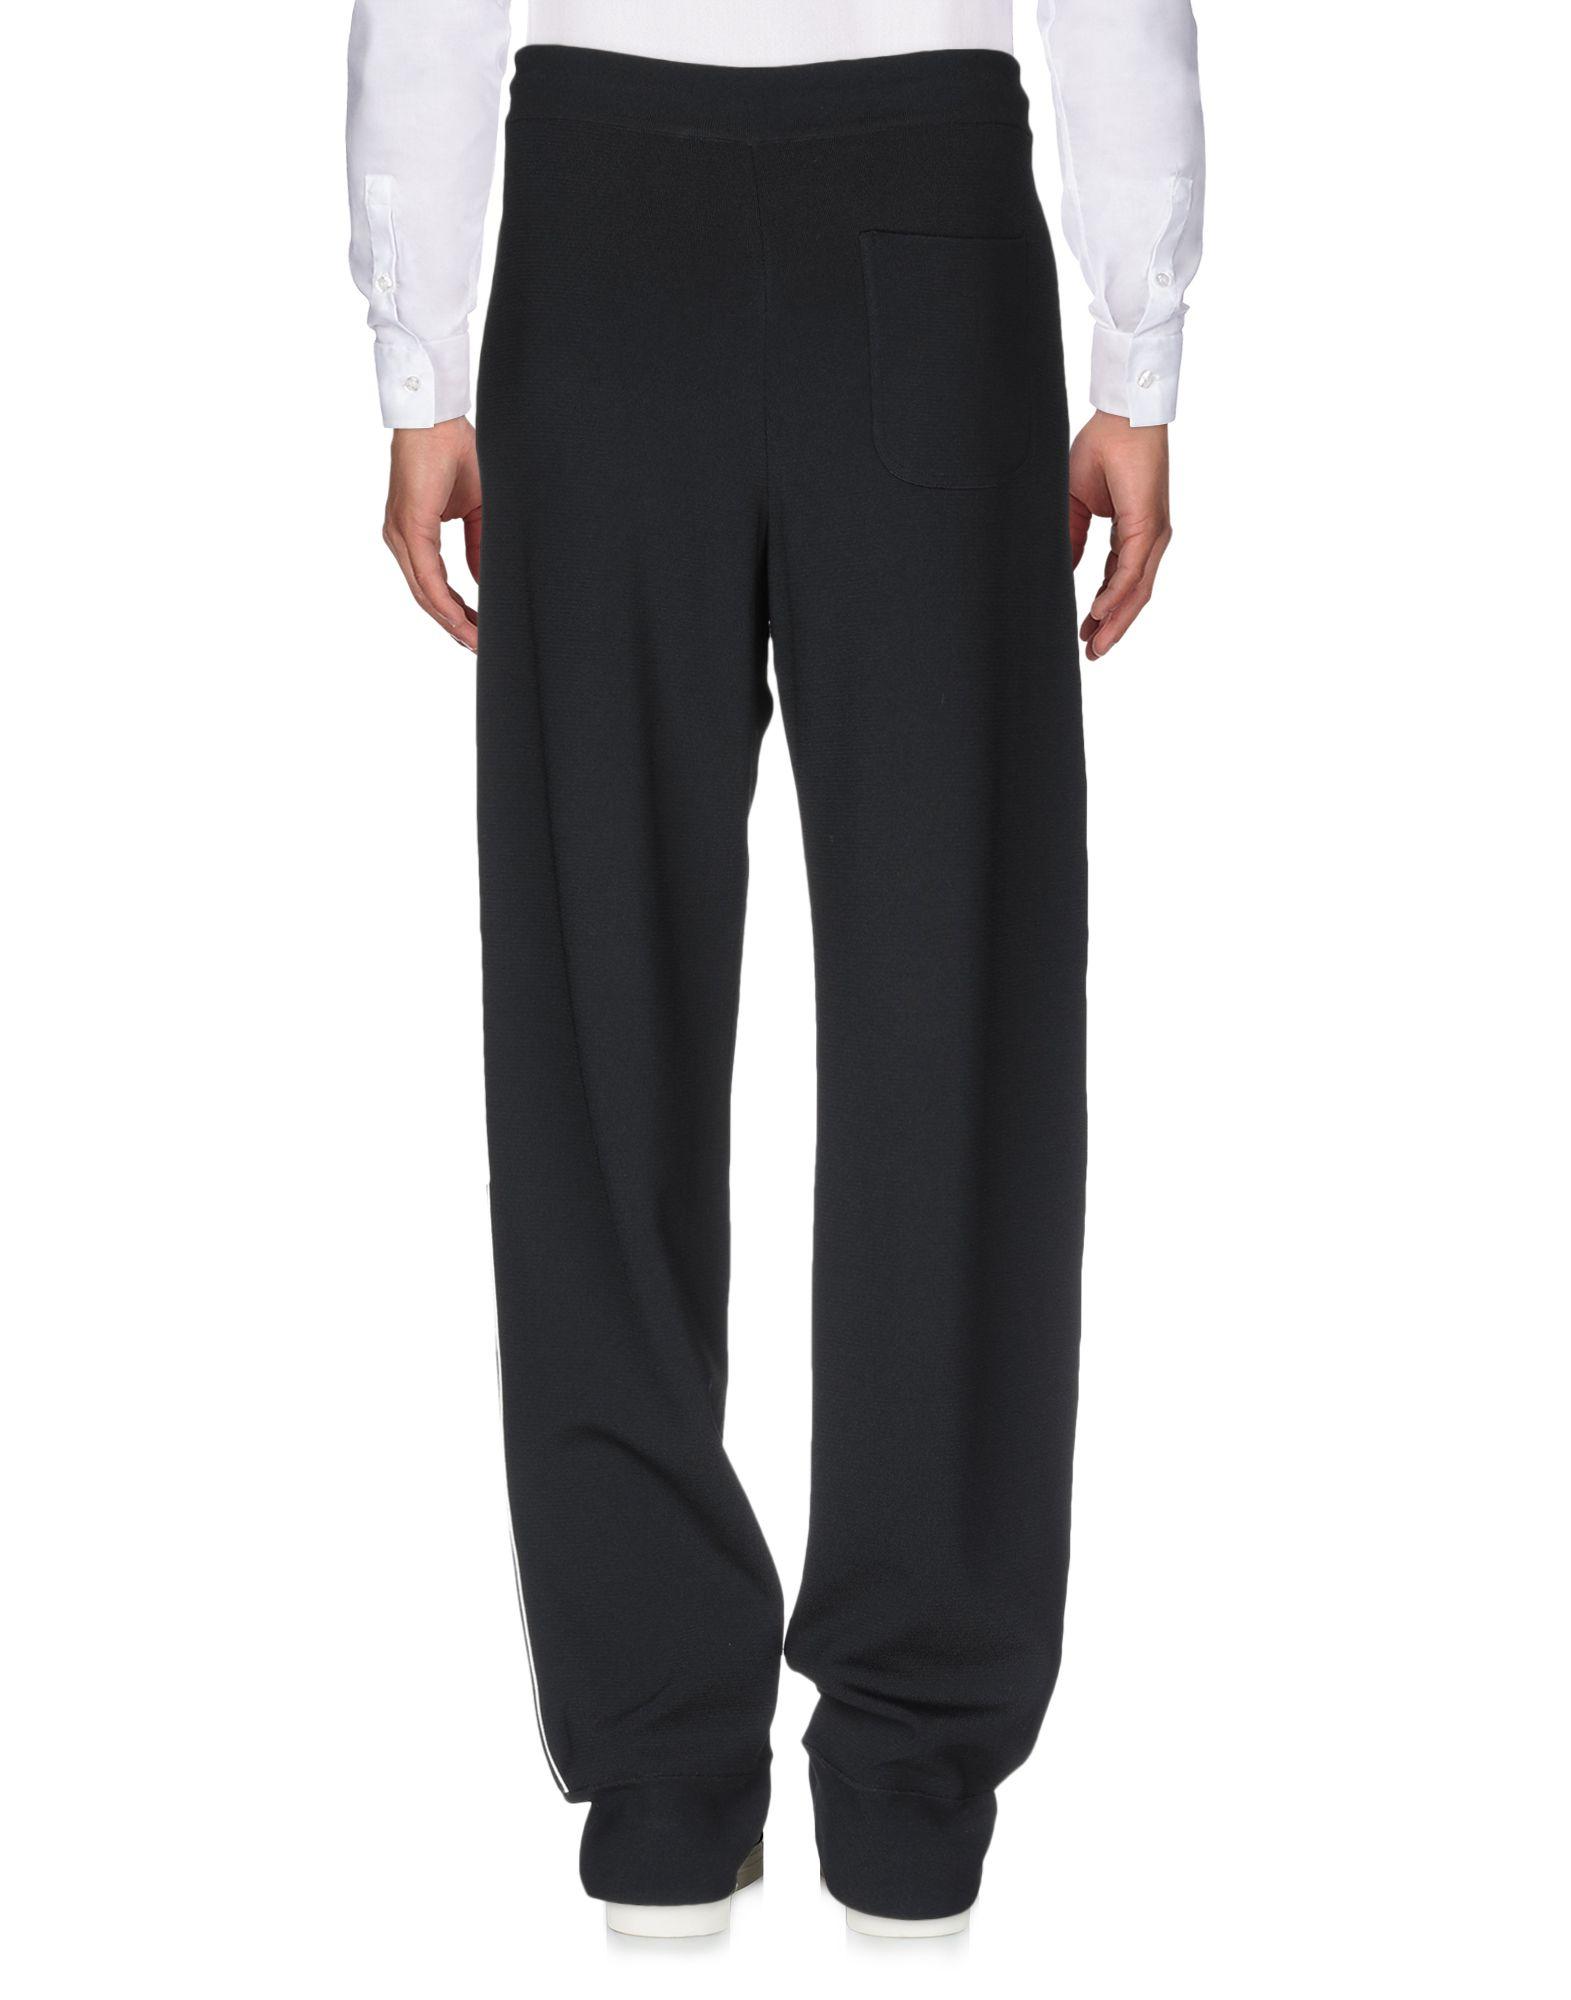 Valentino Casual Trouser in Black for Men - Lyst